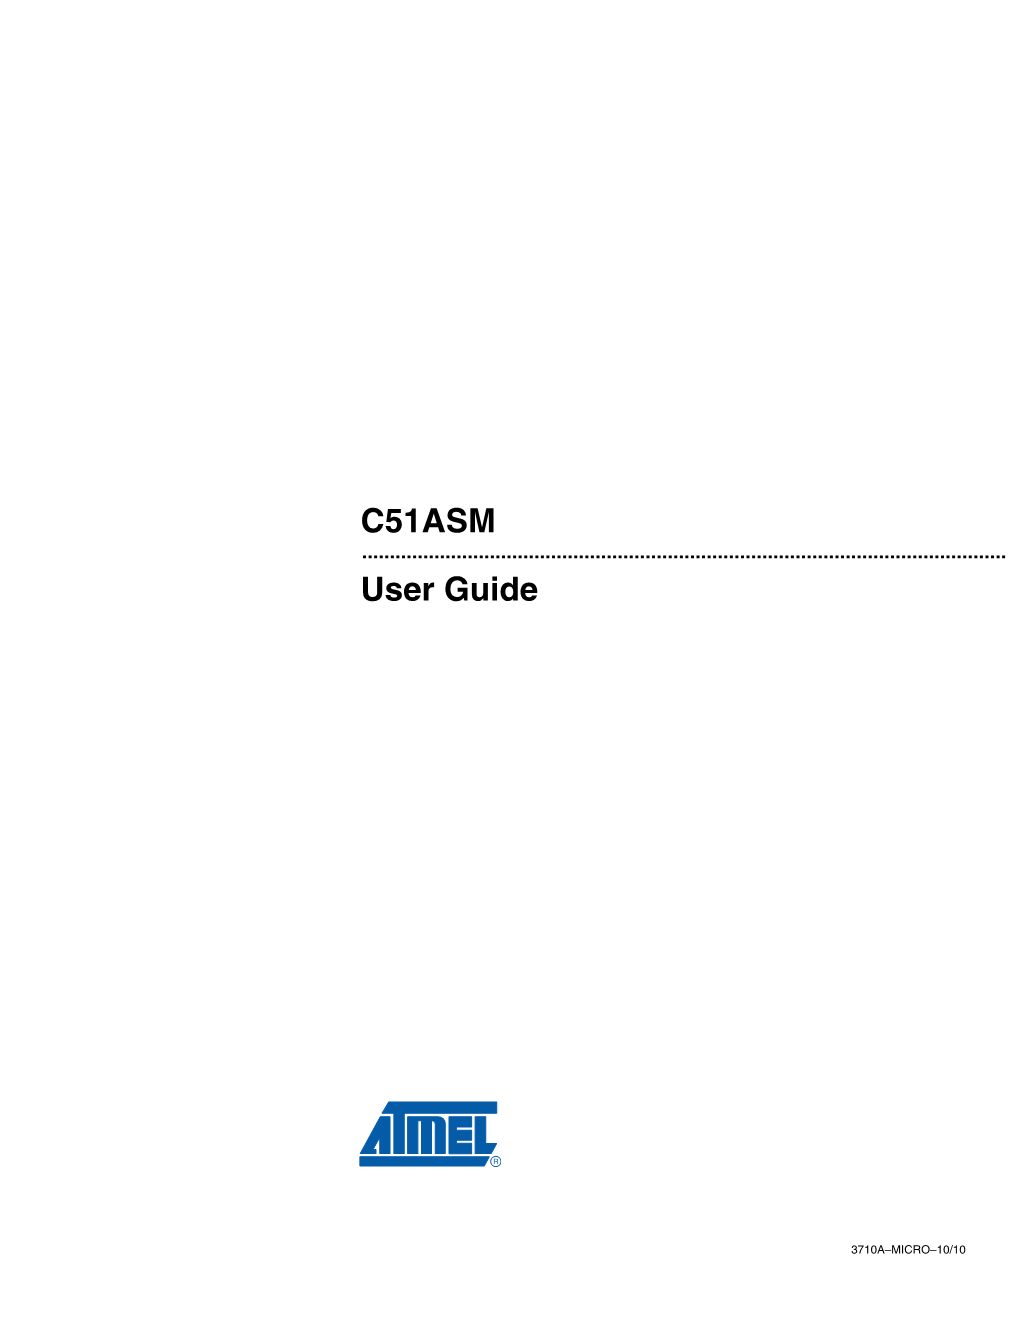 C51ASM User Guide 3710A–MICRO–10/10 Table of Contents